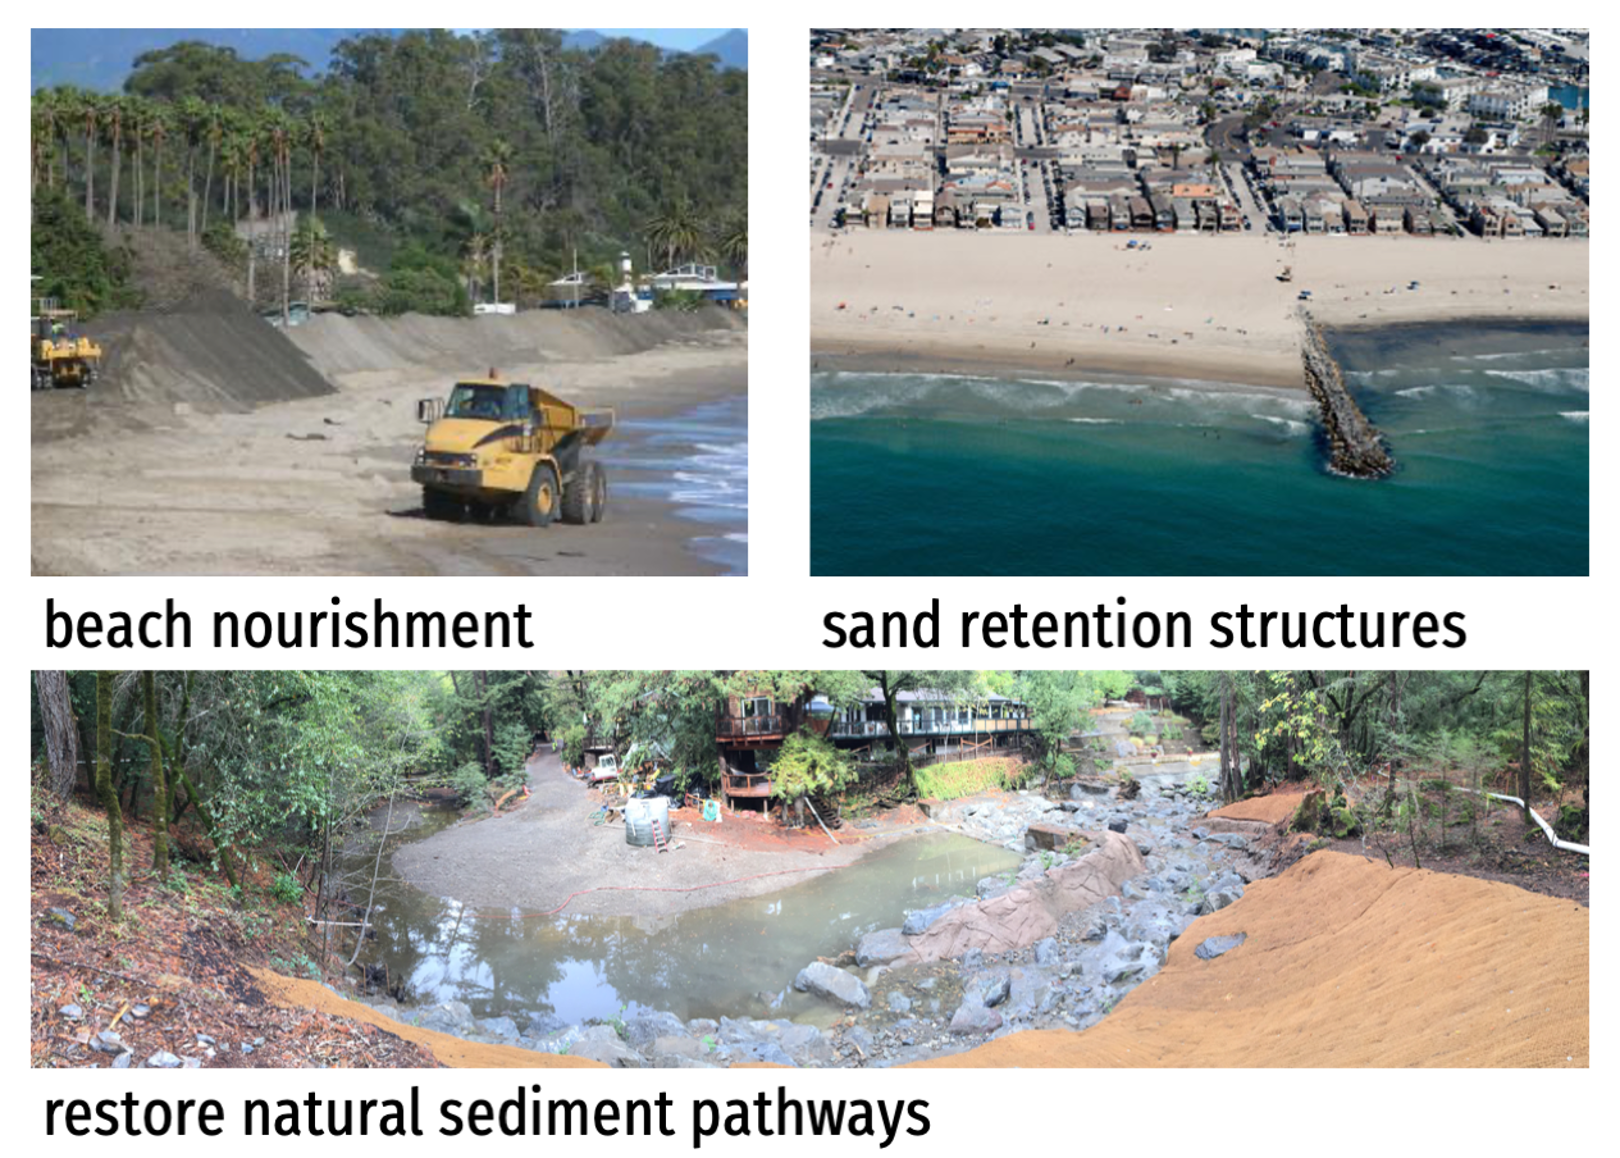 Collage diagram, showing images of dump trucks on a beach, aerial view of beach and pier, and a stream bank being restored